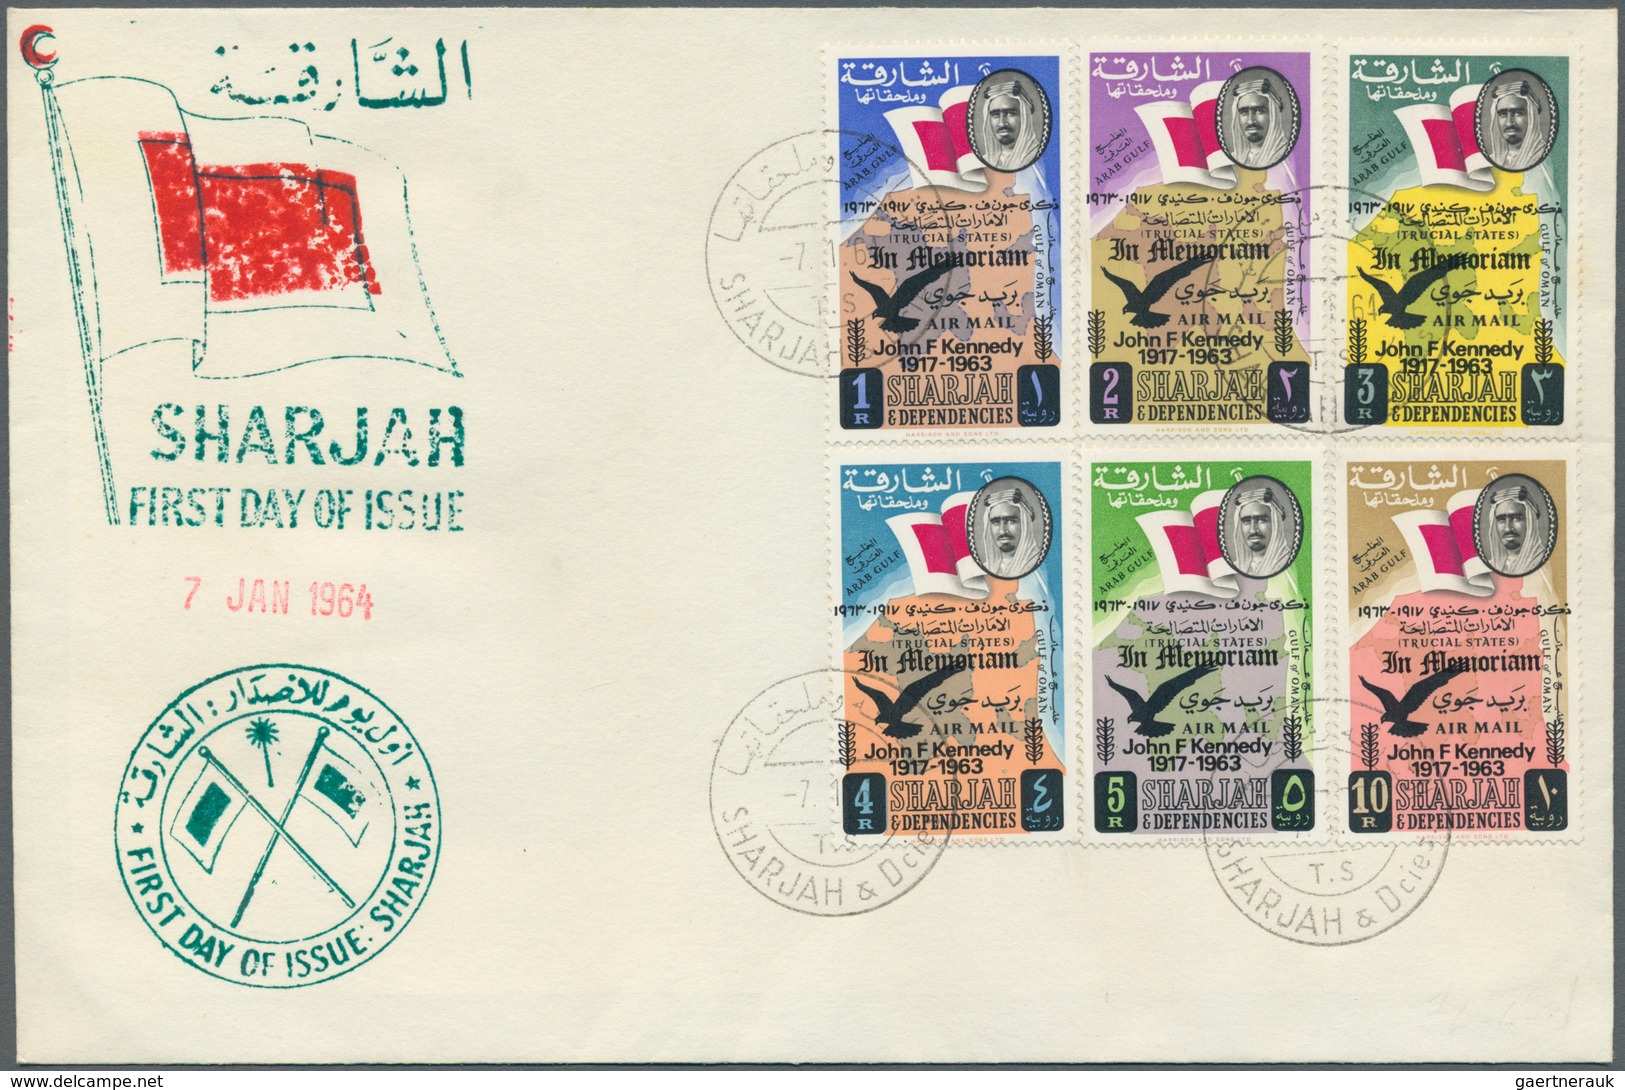 Schardscha / Sharjah: 1963/1964, assortment of 21 cacheted "f.d.c." (some dates differ from those st